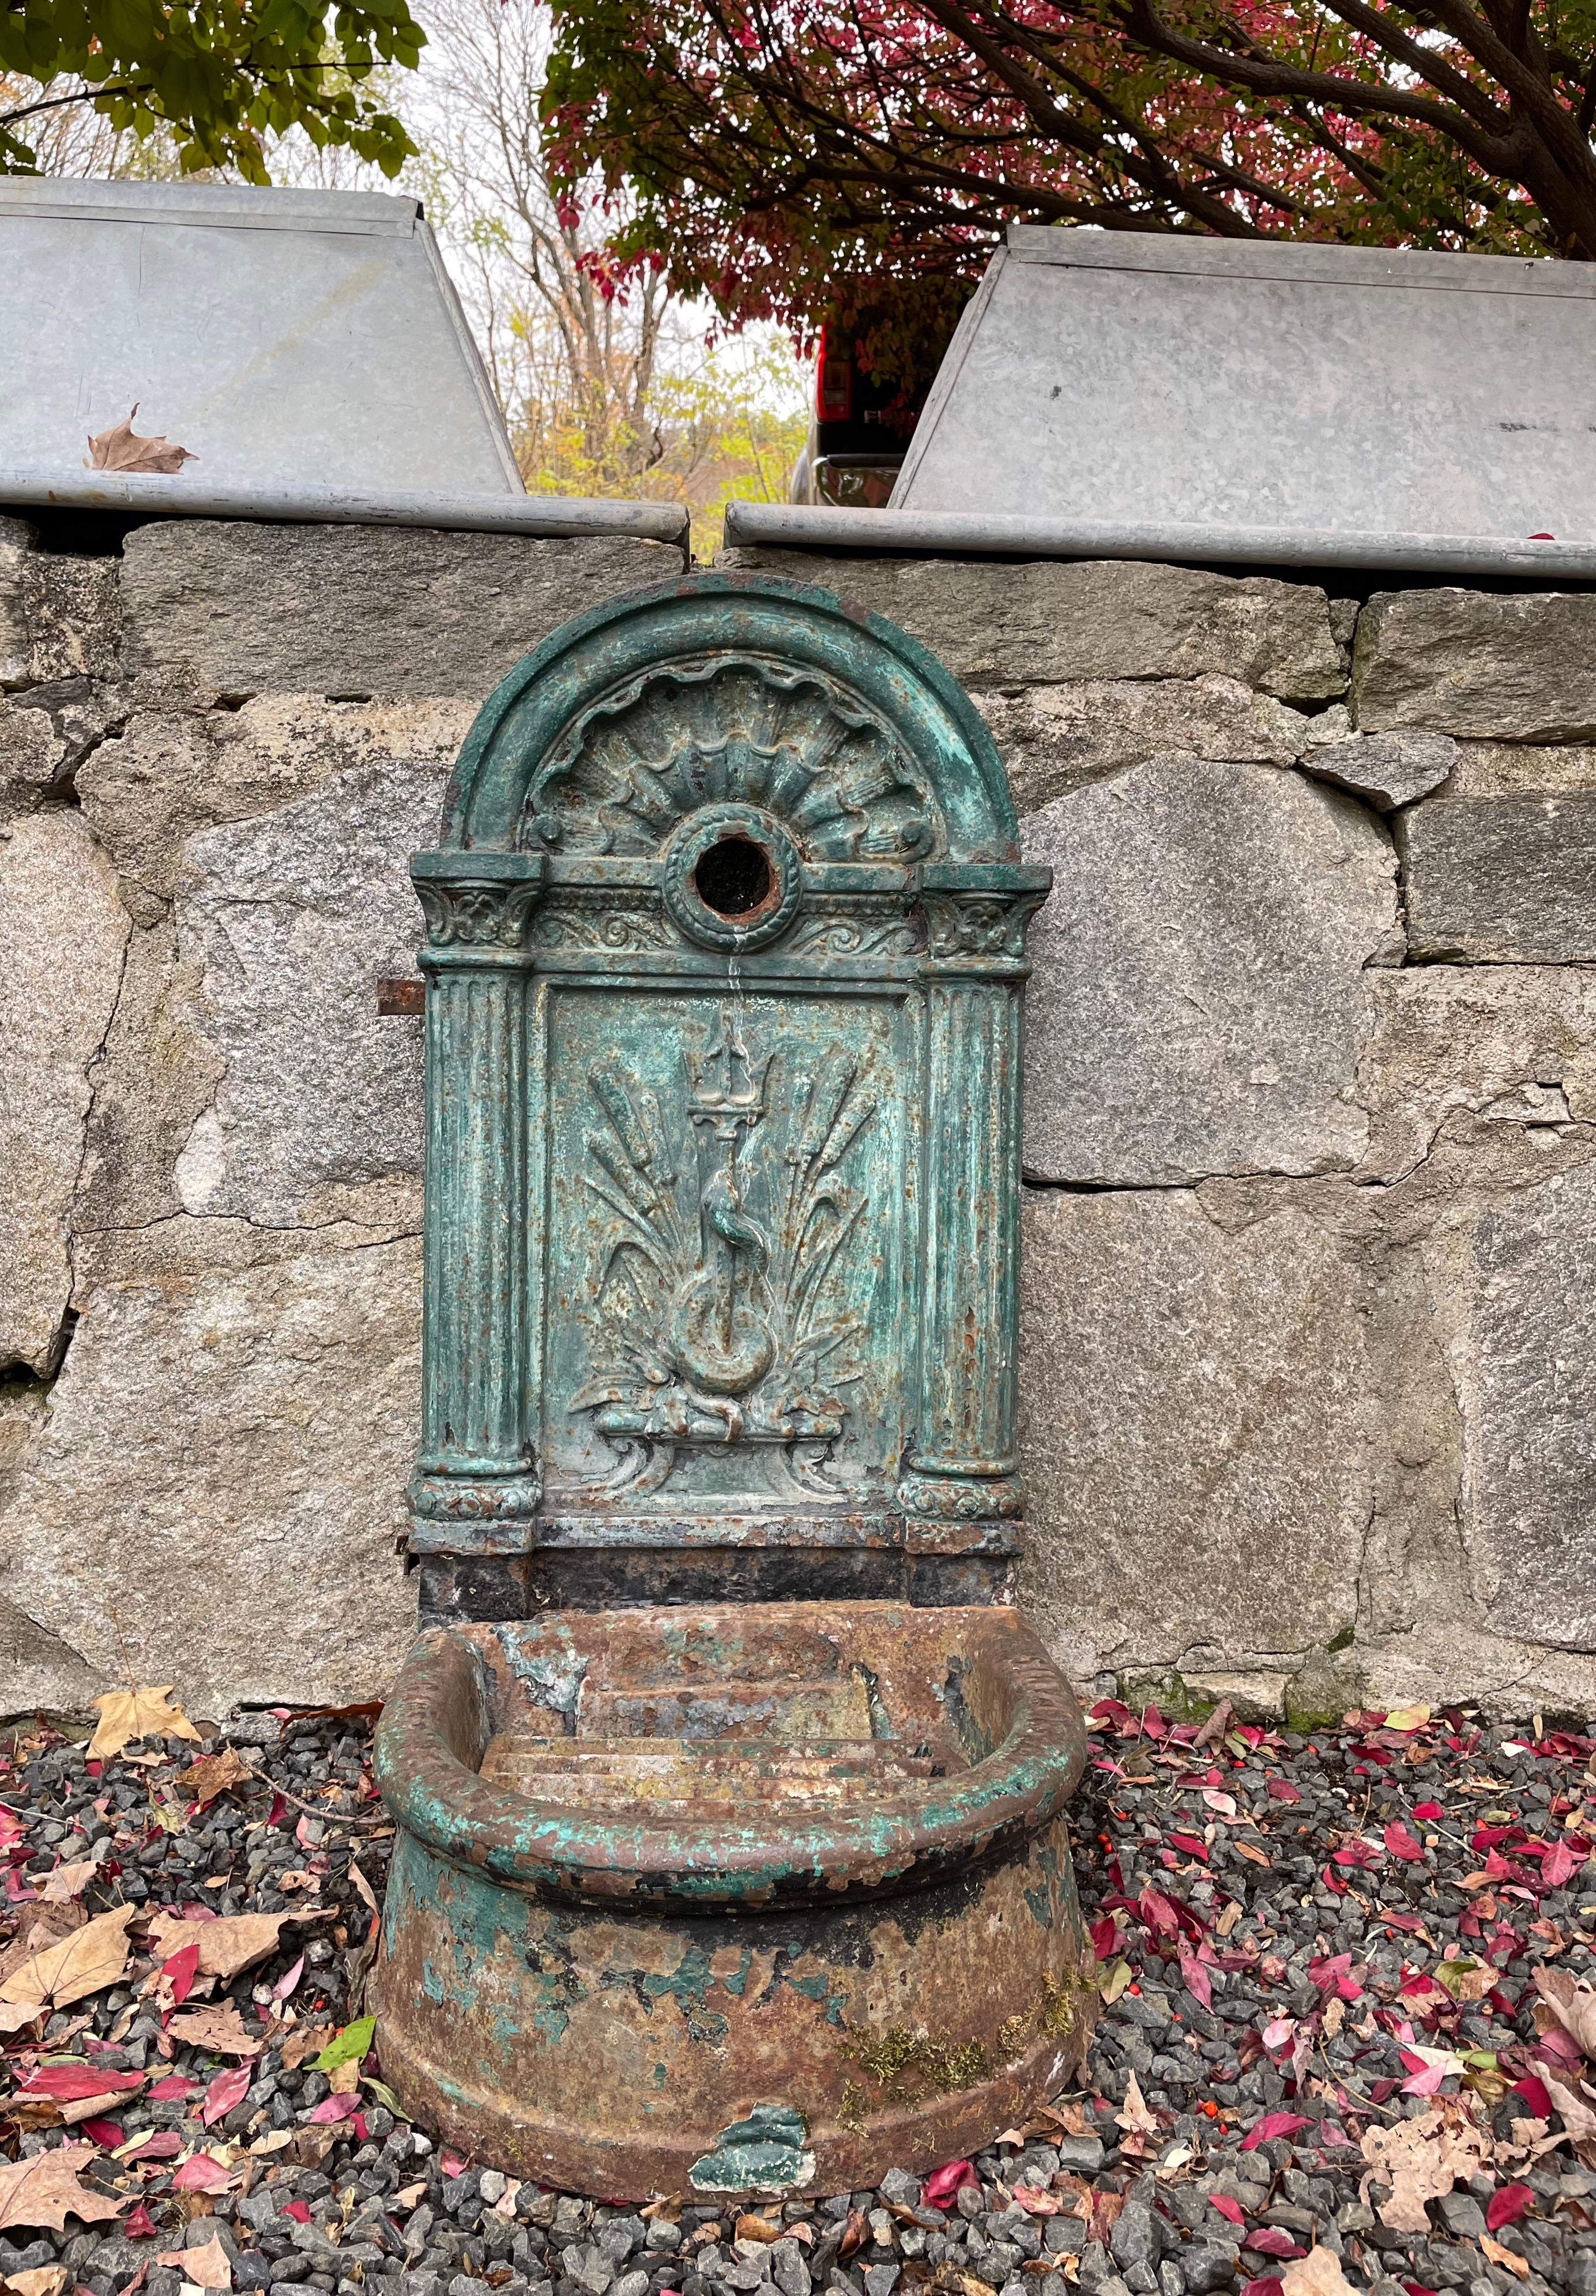 We adore the faded blue/green color on this stunning enameled cast iron courtyard fountain that is signed by its maker in Paris, the famous foundry of Gaget Gauthier (which incidentally also pieced together all the copper to make the Statue of